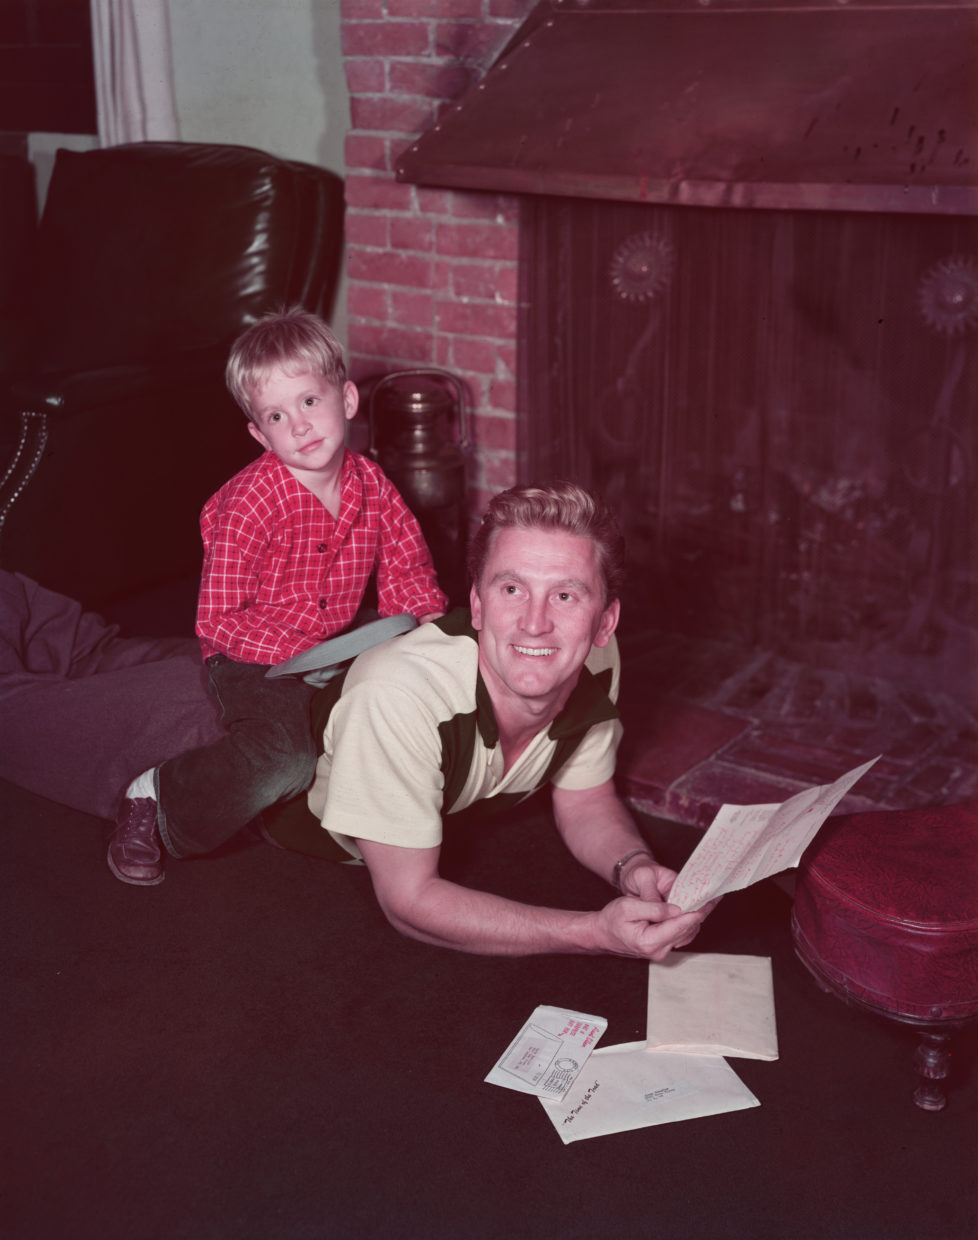 circa 1955: American actor Michael Douglas as a young boy, lounging with his father, the American actor Kirk Douglas, in front of a brick fireplace. Kirk is lying on his stomach and reading his mail as Michael sits on his back. (Photo by Hulton Archive/Getty Images)